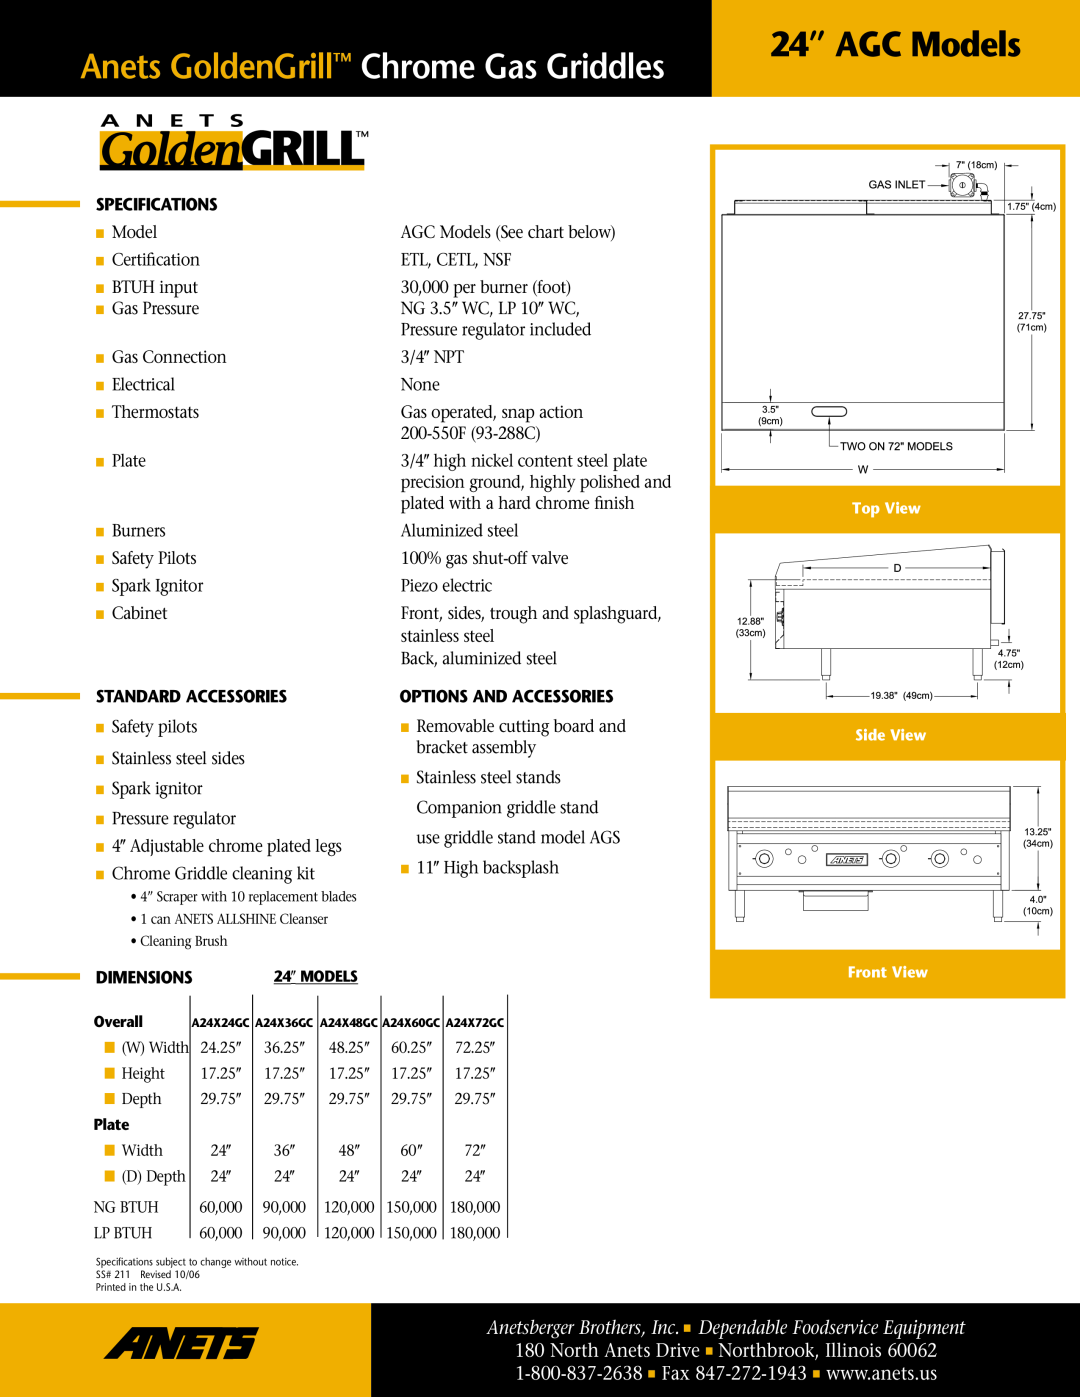 Anetsberger Brothers A24X48GC Specifications, Standard Accessories, Dimensions, Options And Accessories, 24” AGC Models 